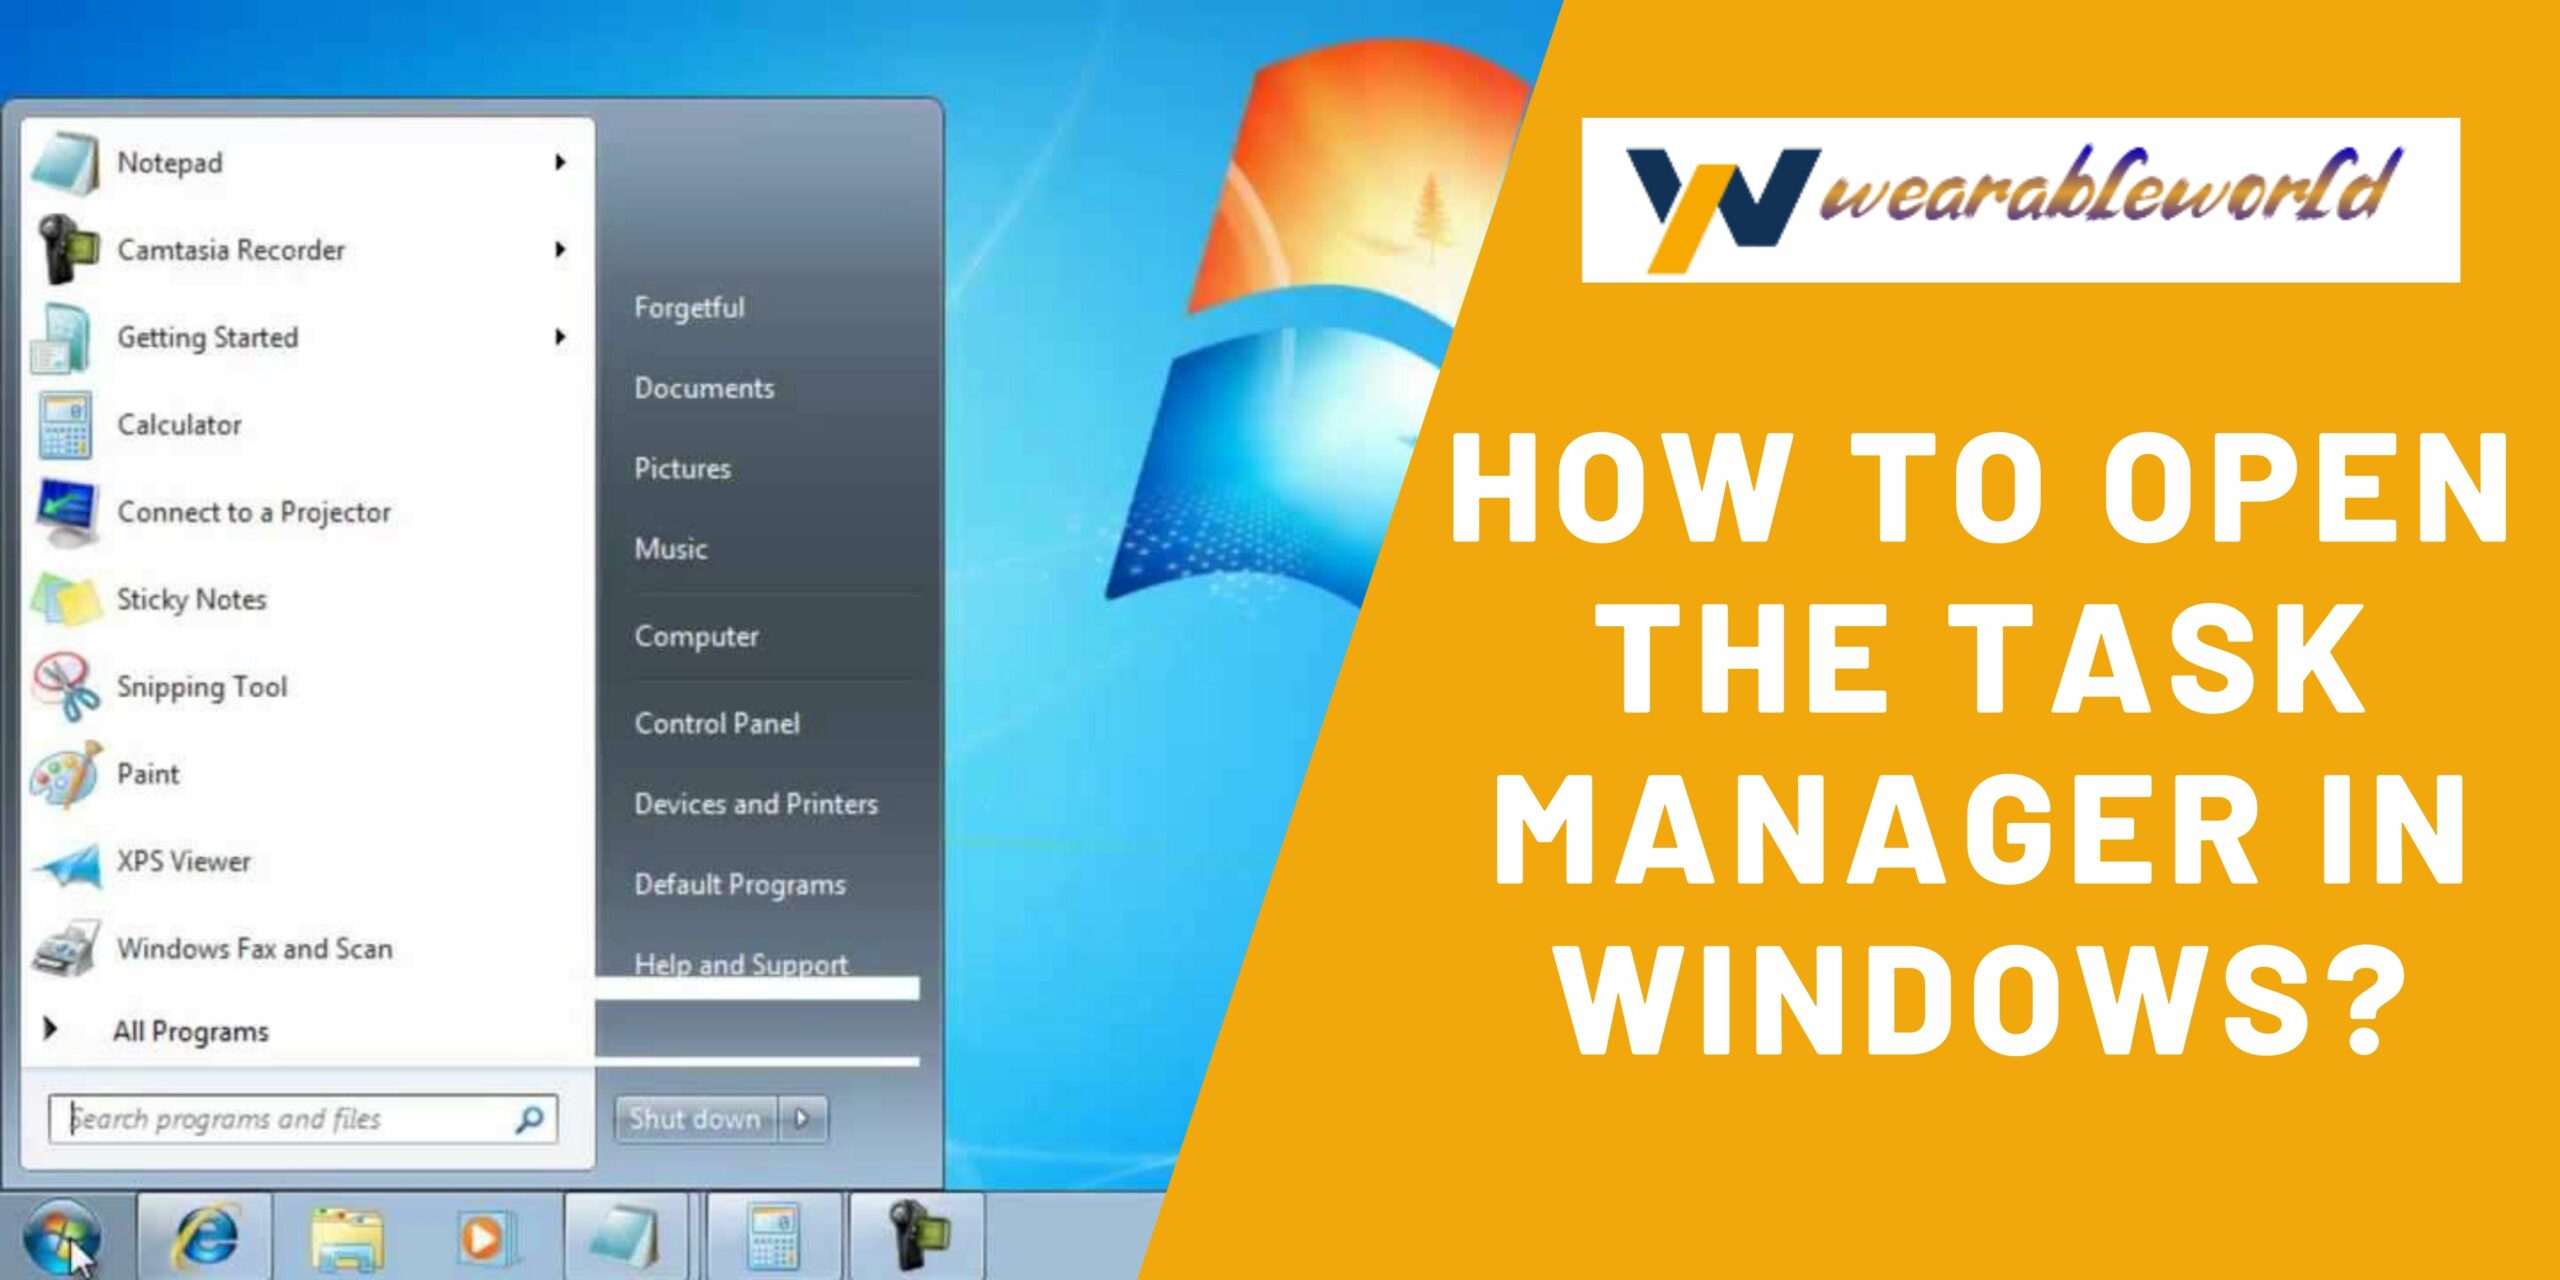 Open the task manager in Windows